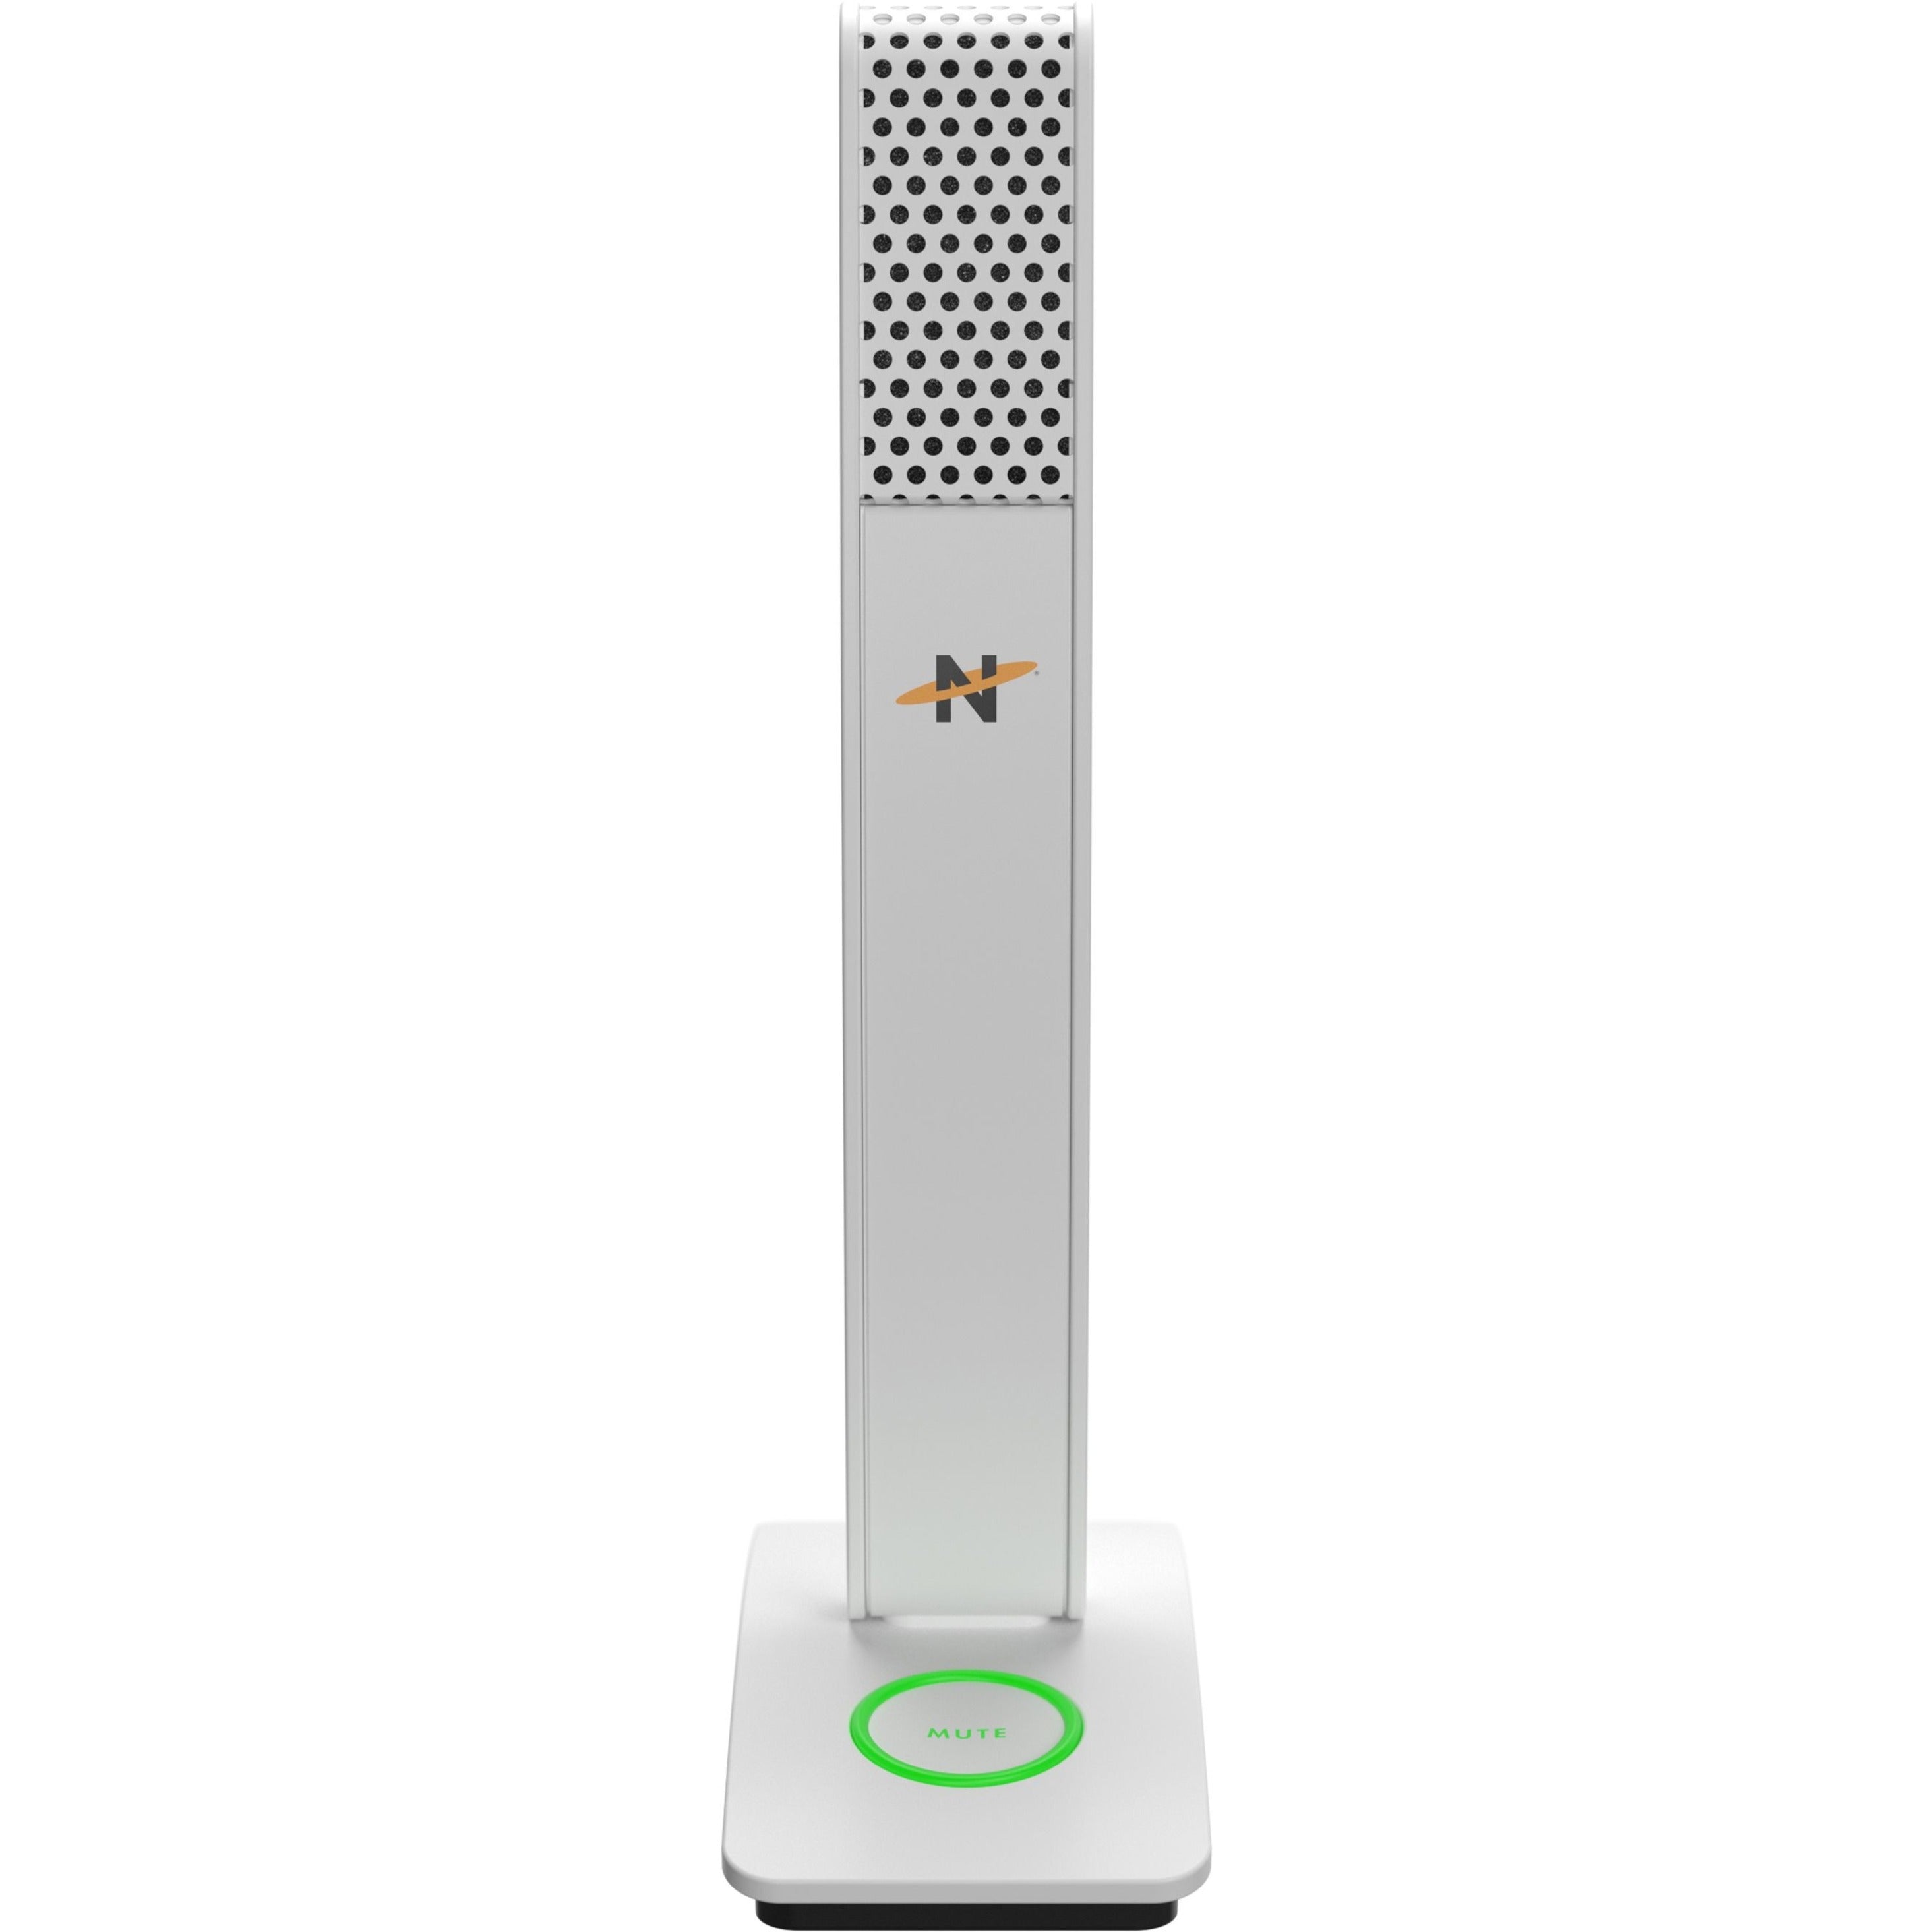 Neat Microphones MIC-1015-01 Neat Skyline SKYWHT Wired Condenser Microphone - White, 2 Year Warranty, Cardioid Directional, Desktop, USB Interface, Mute Control